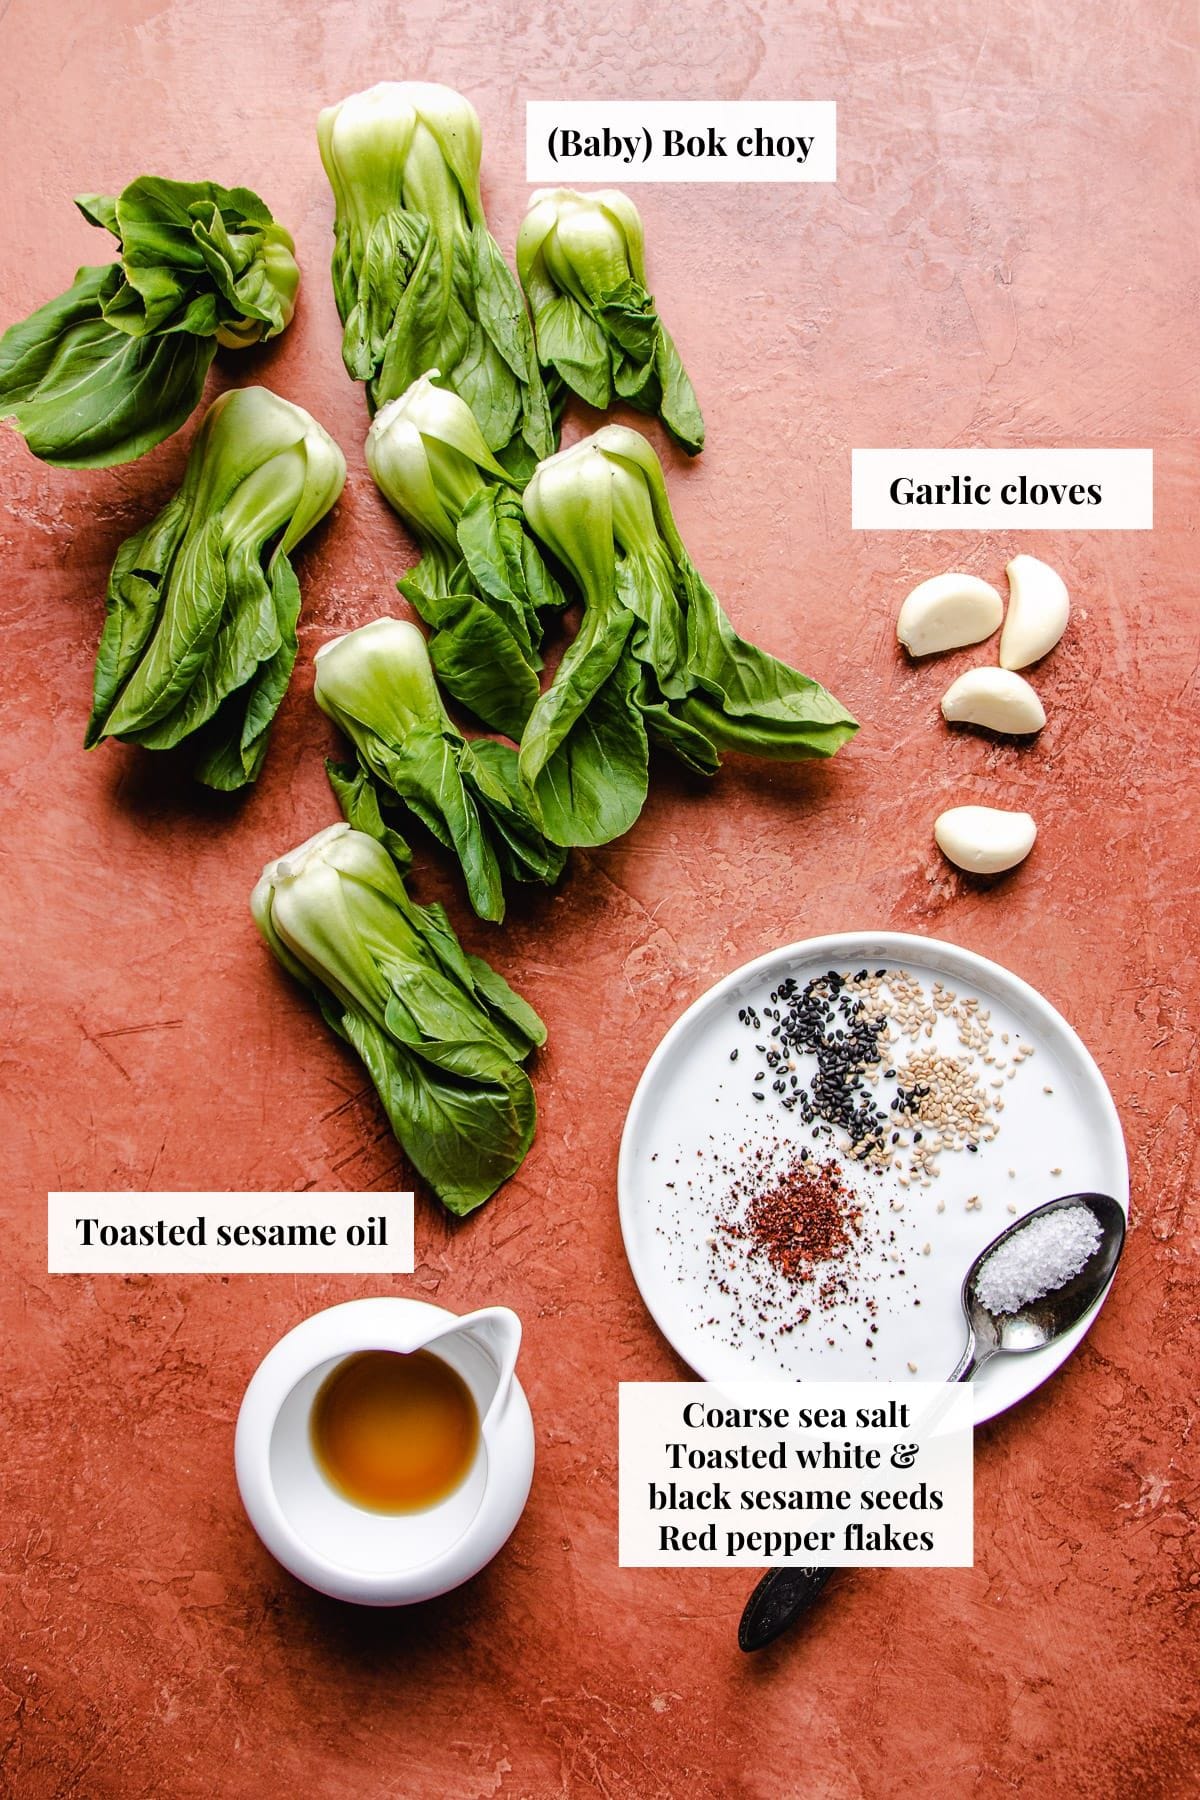 Ingredients needed to make stir fry with bok choy recipe